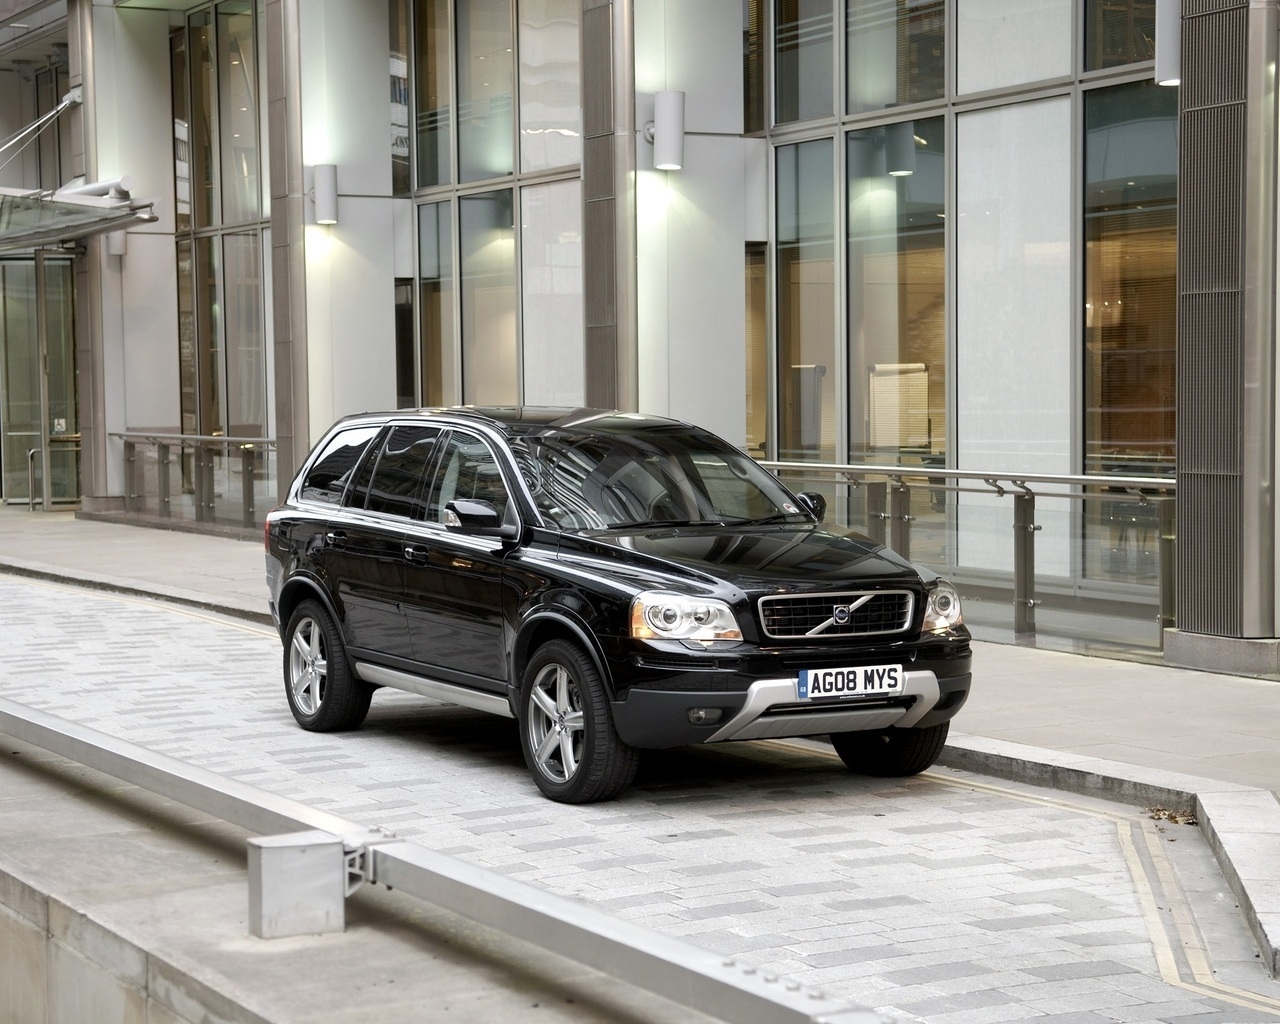 Volvo XC 90 for 1280 x 1024 resolution